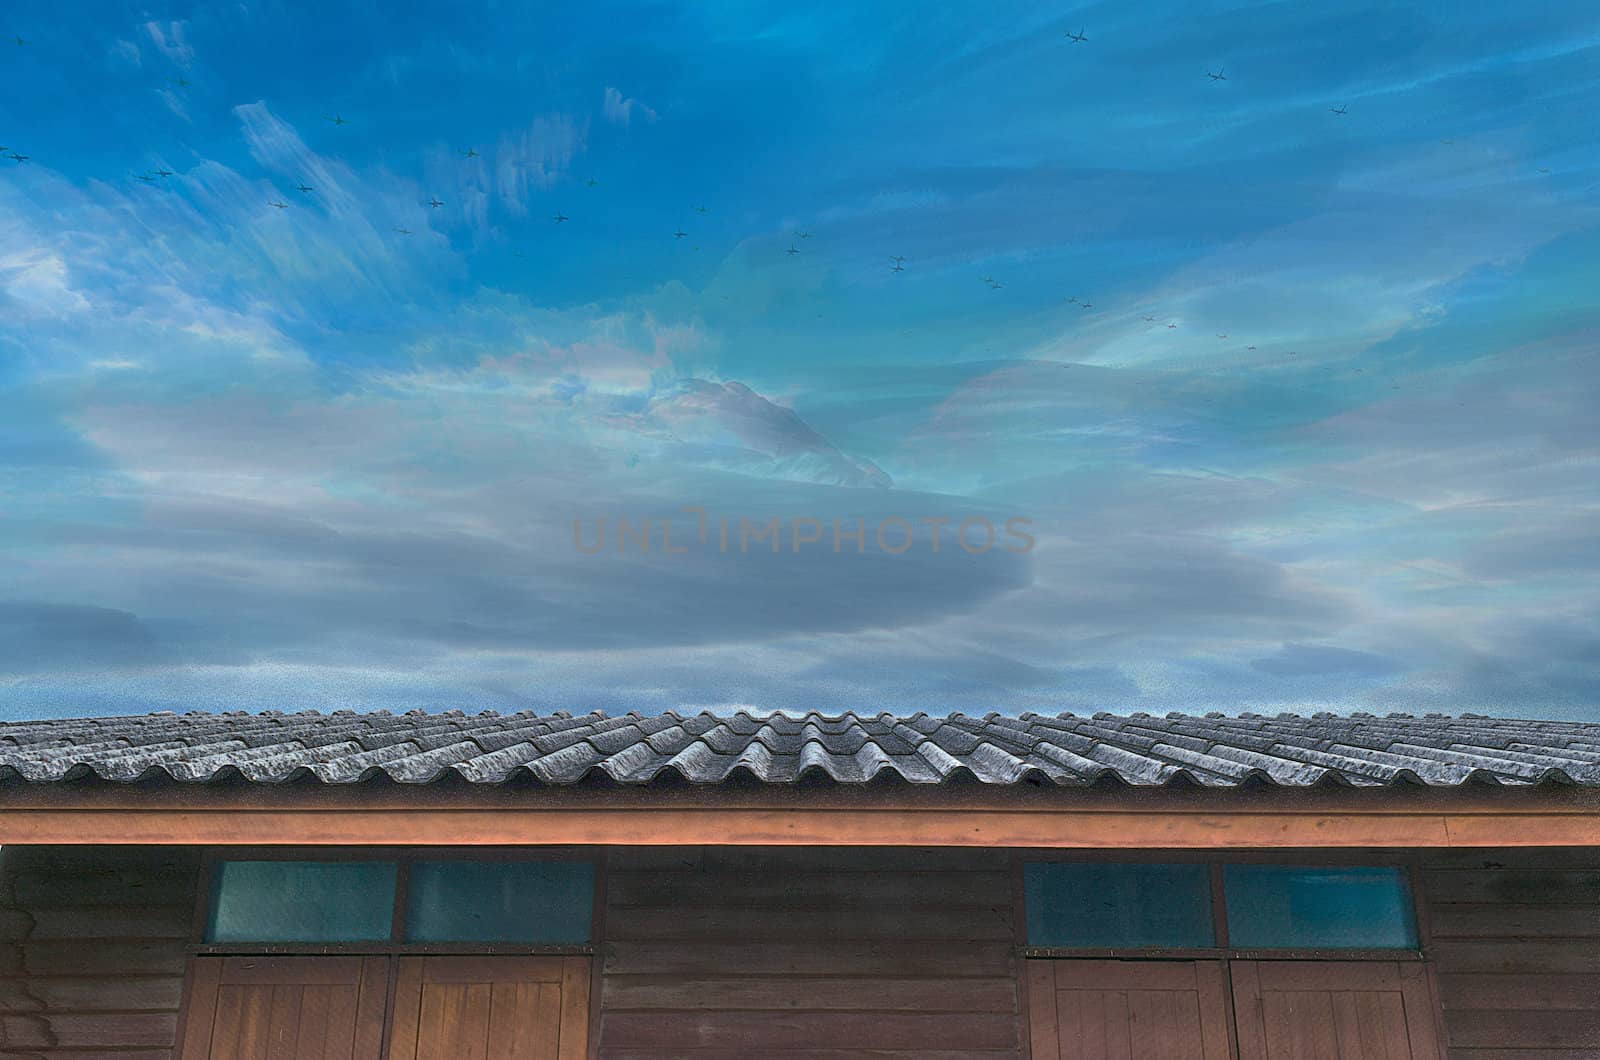 The Moving Planes, Cloudy Blue Sky and Roof of Wooden House.